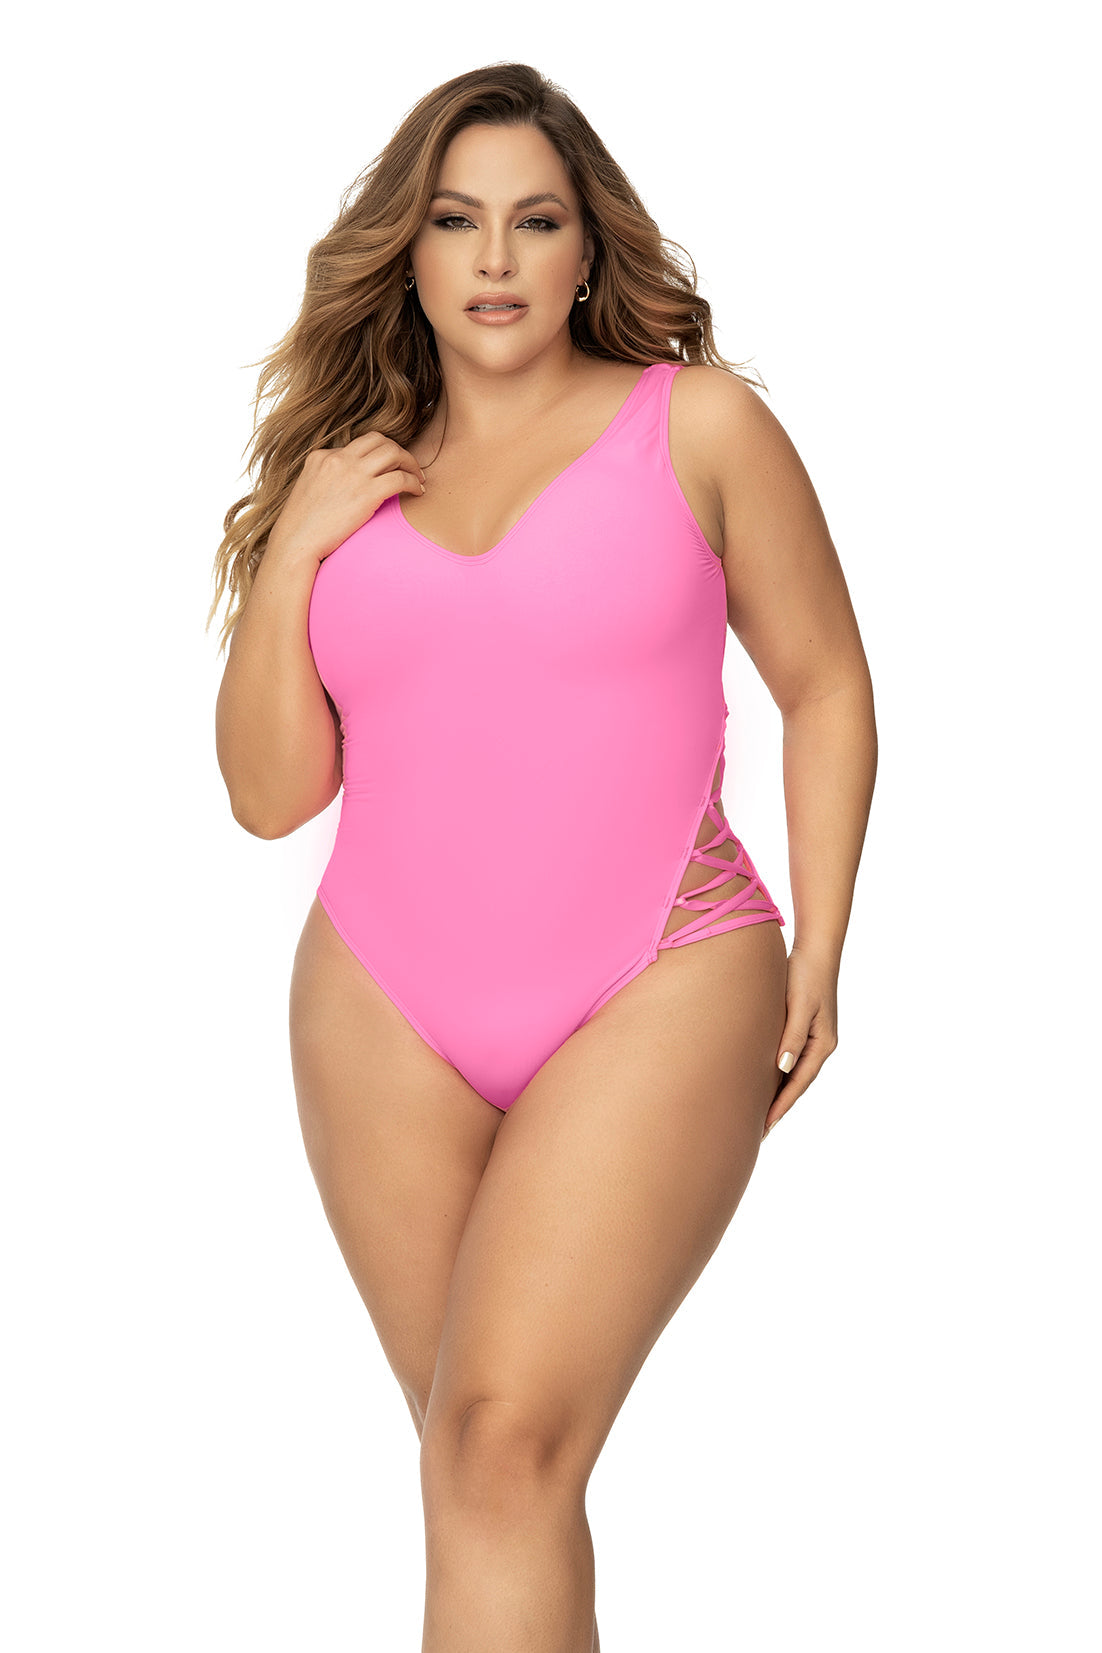 Beverly Hills Lace Up One Piece Plus